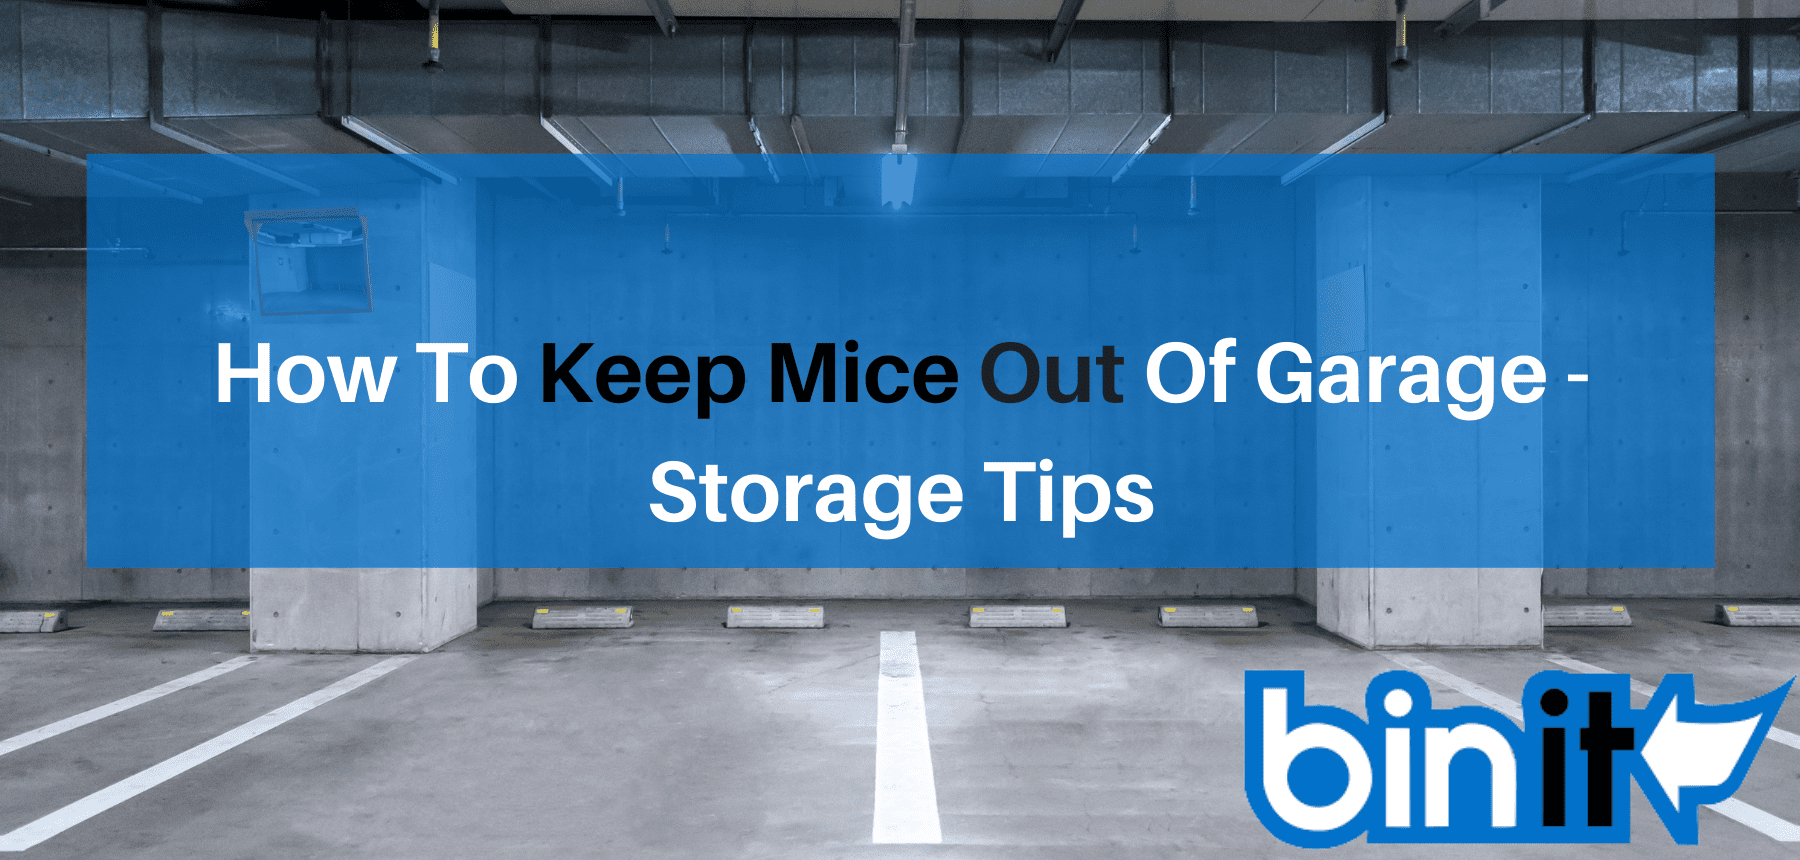 https://bin-it.com/wp-content/uploads/2022/02/How-To-Keep-Mice-Out-Of-Garage-Storage-Tips.png